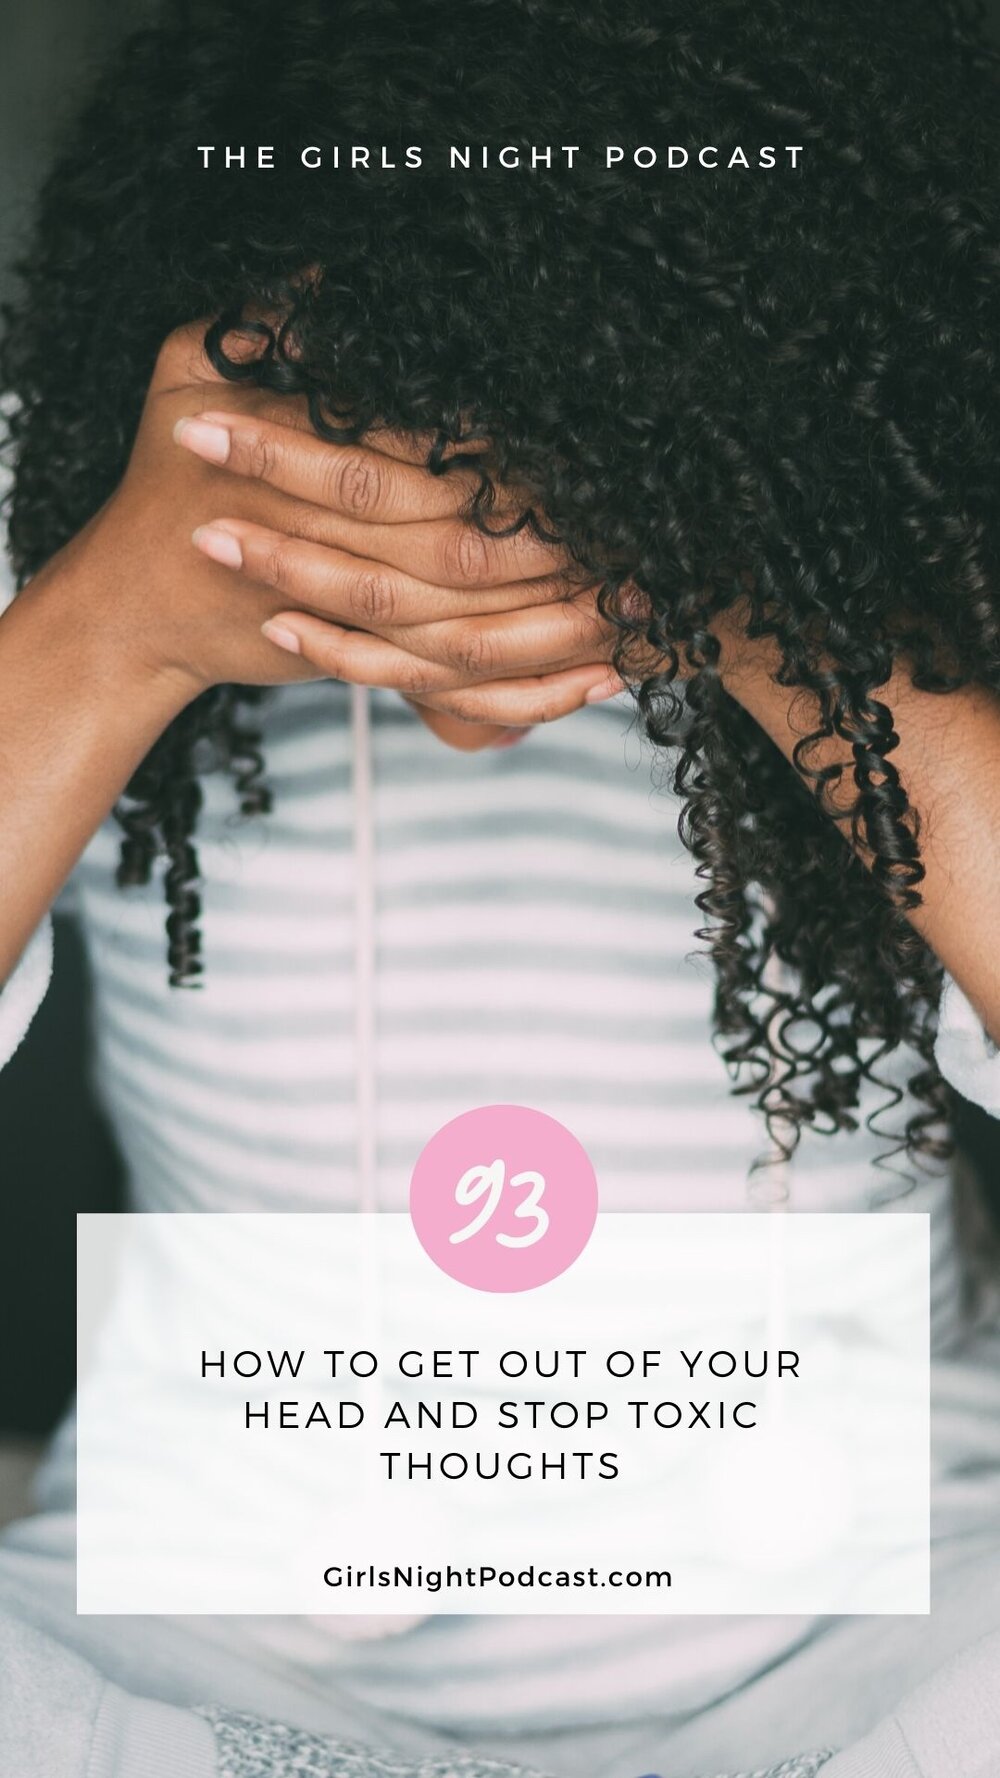 How To Get Out Of Your Head And Stop Toxic Thoughts The Girls Night Podcast